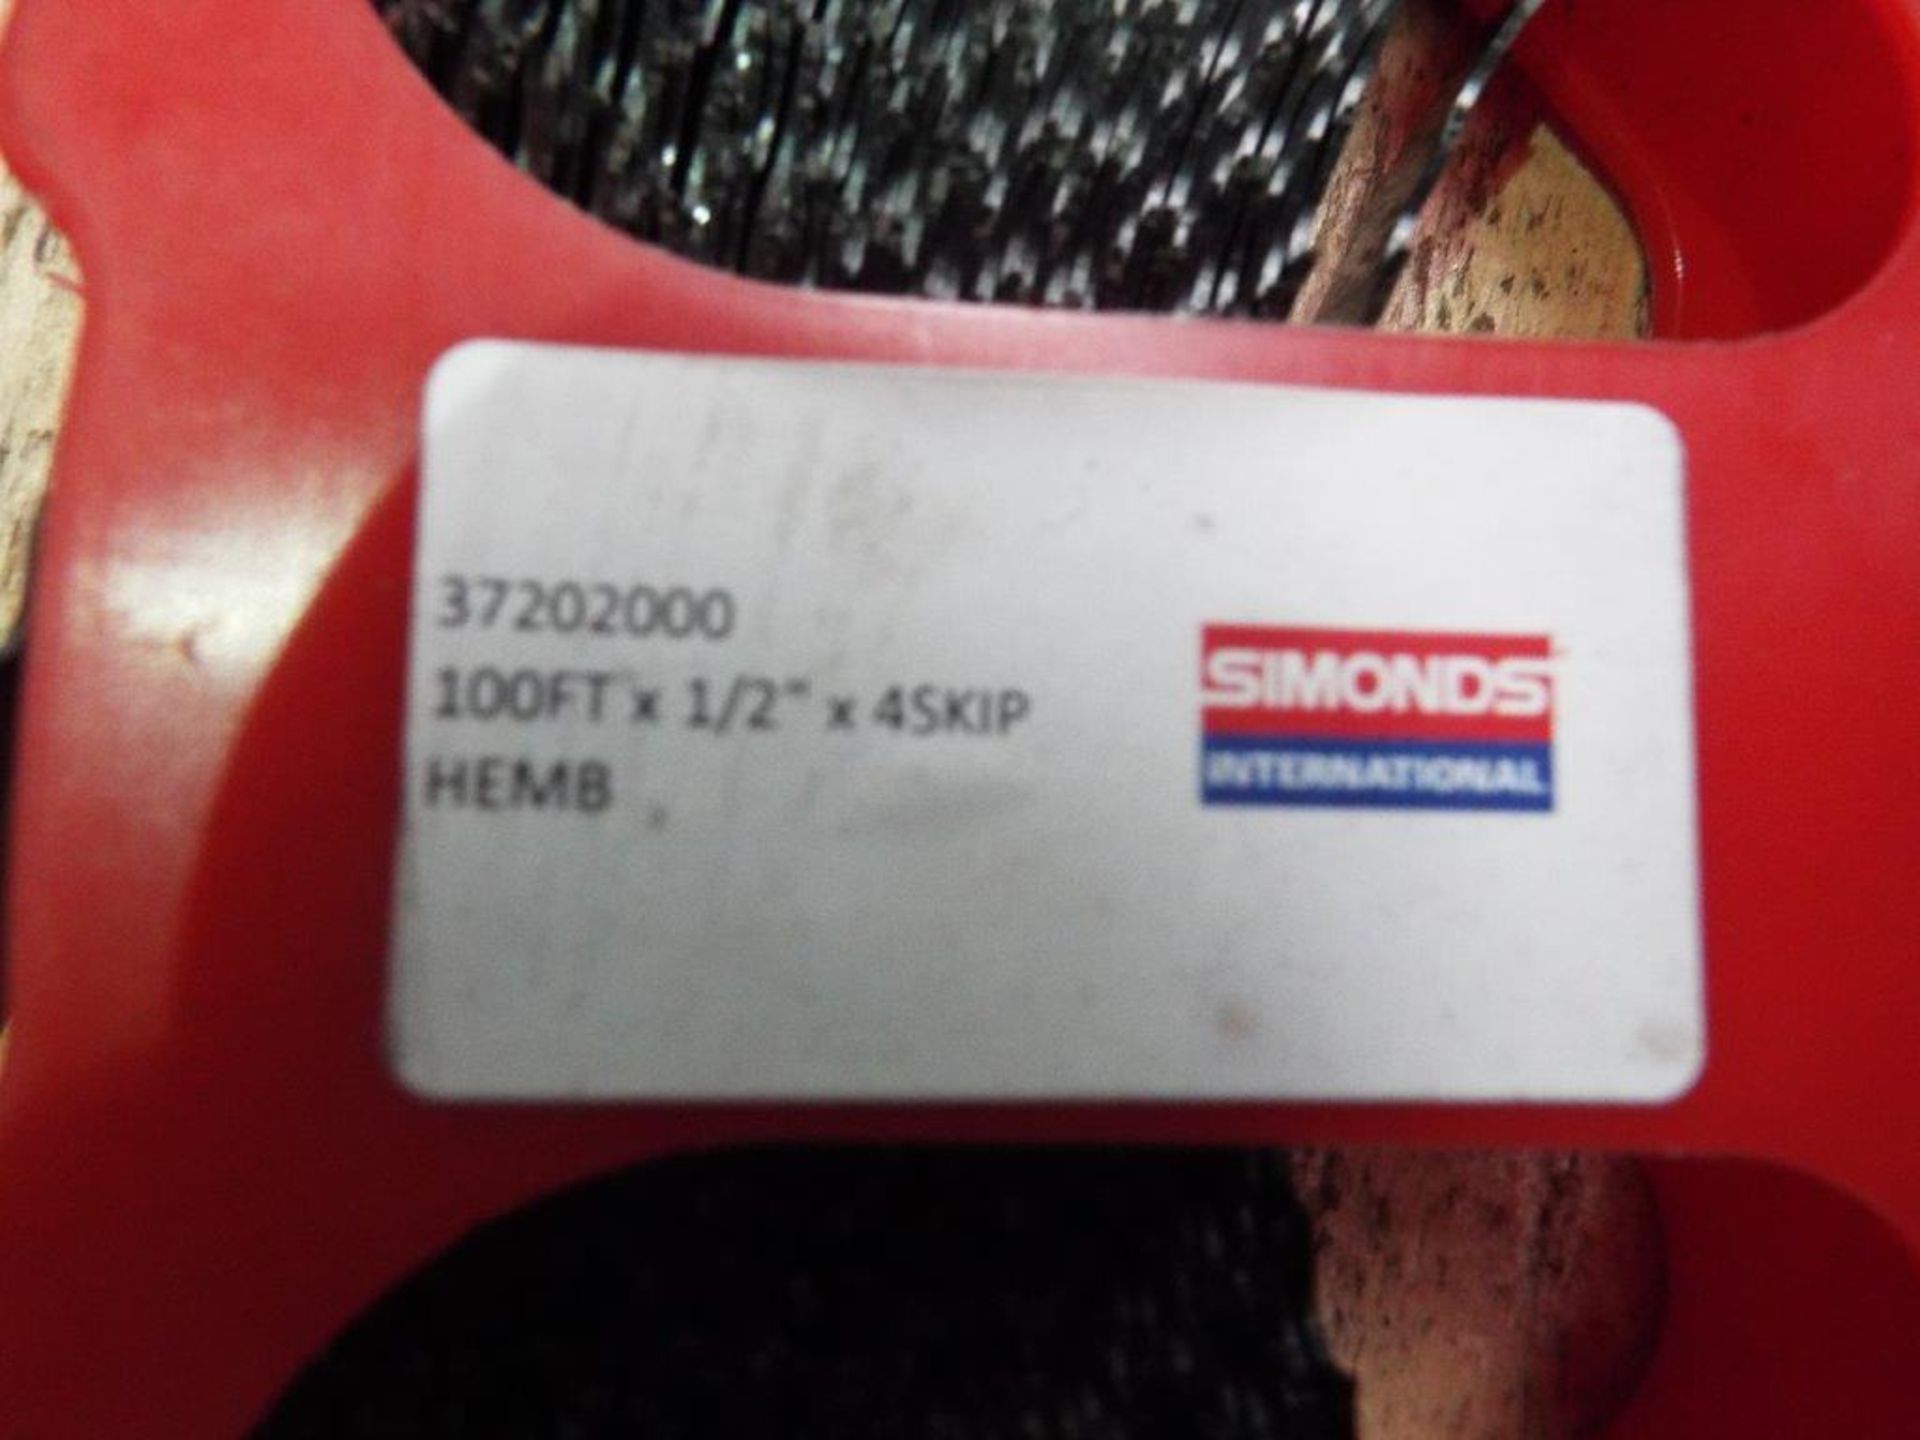 10 x Simmonds 100ft 1/2" x 4 Skip Band Saw Blade Coils - Image 3 of 5